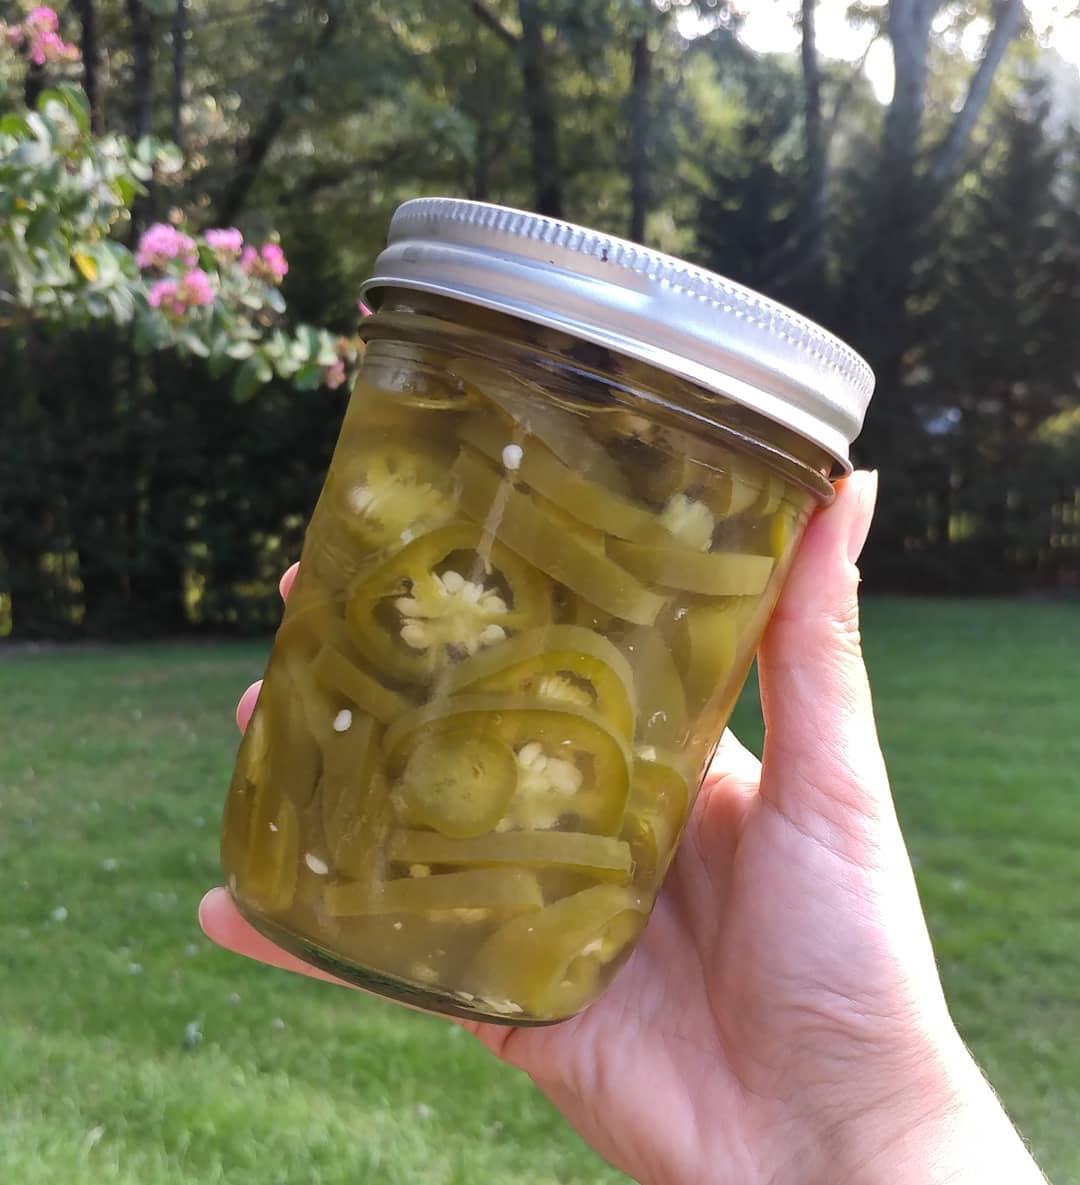 Pickled Coolapeños! I don't like hot peppers so when I saw the seedlings I knew they were for me! Then I had a pile on the counter and knew I needed a recipe. These are just a quick pickle with vinegar, sugar and salt. Easy to make and the result is crunchy and tangy but not hot. Winner!